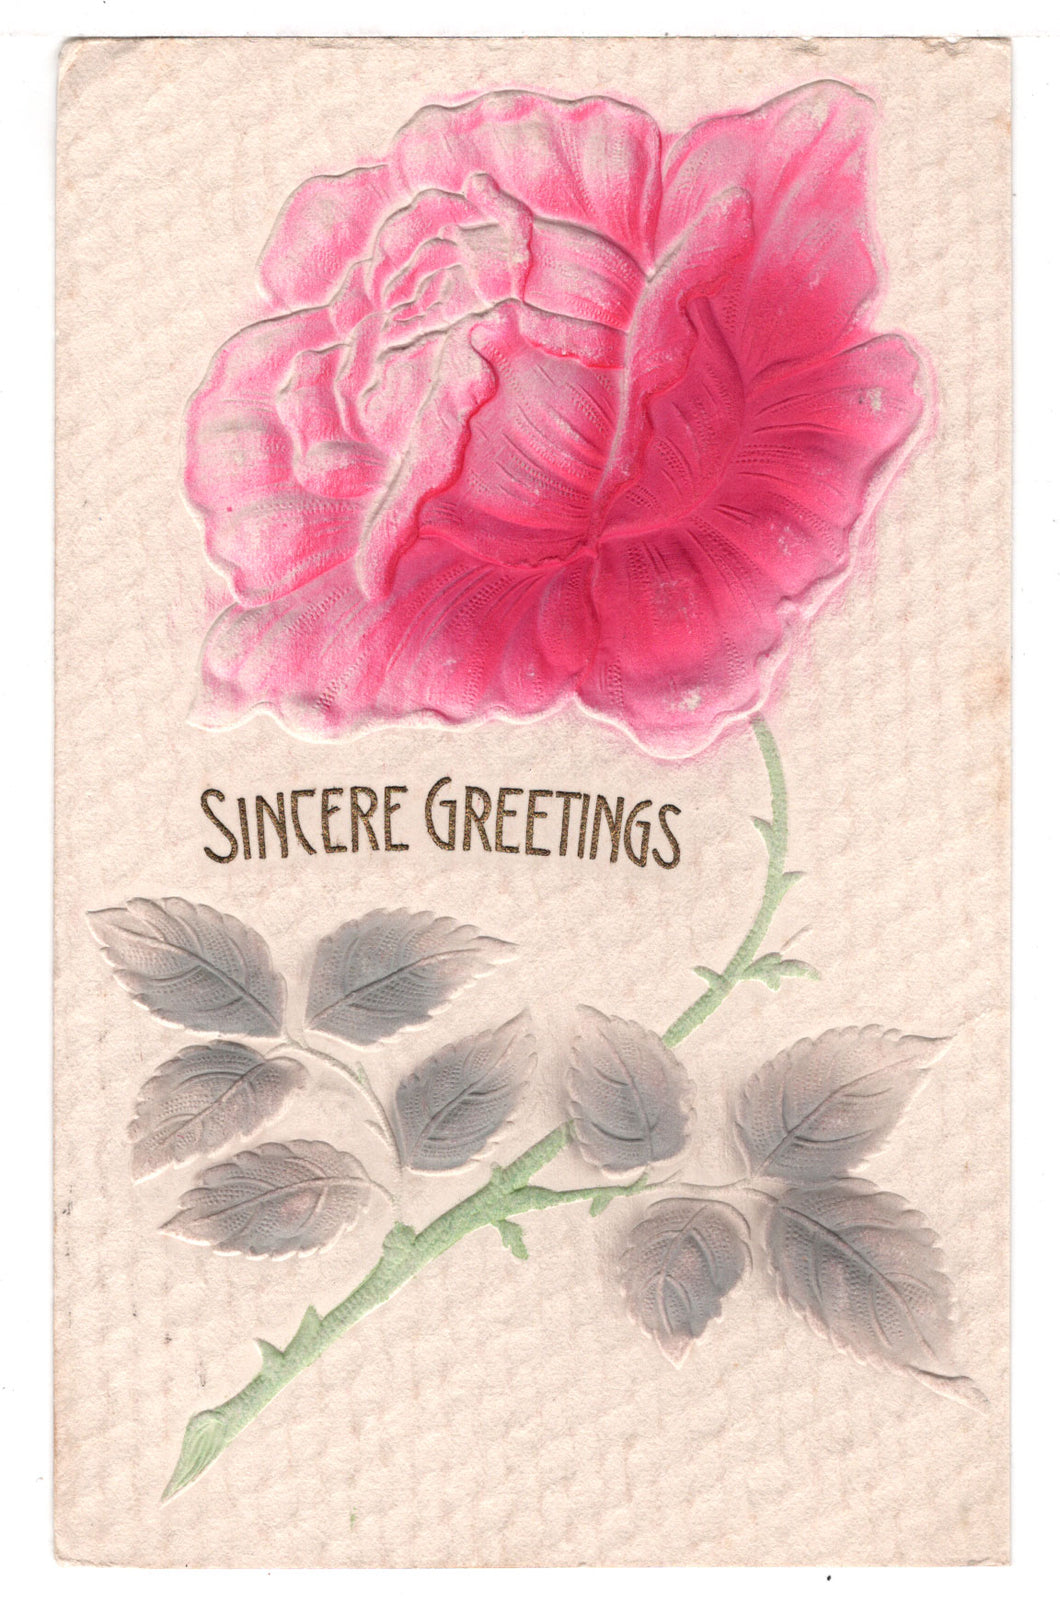 Sincere Greetings Vintage Original Postcard # 4582 - Post Marked March 14 (Early 1900's)